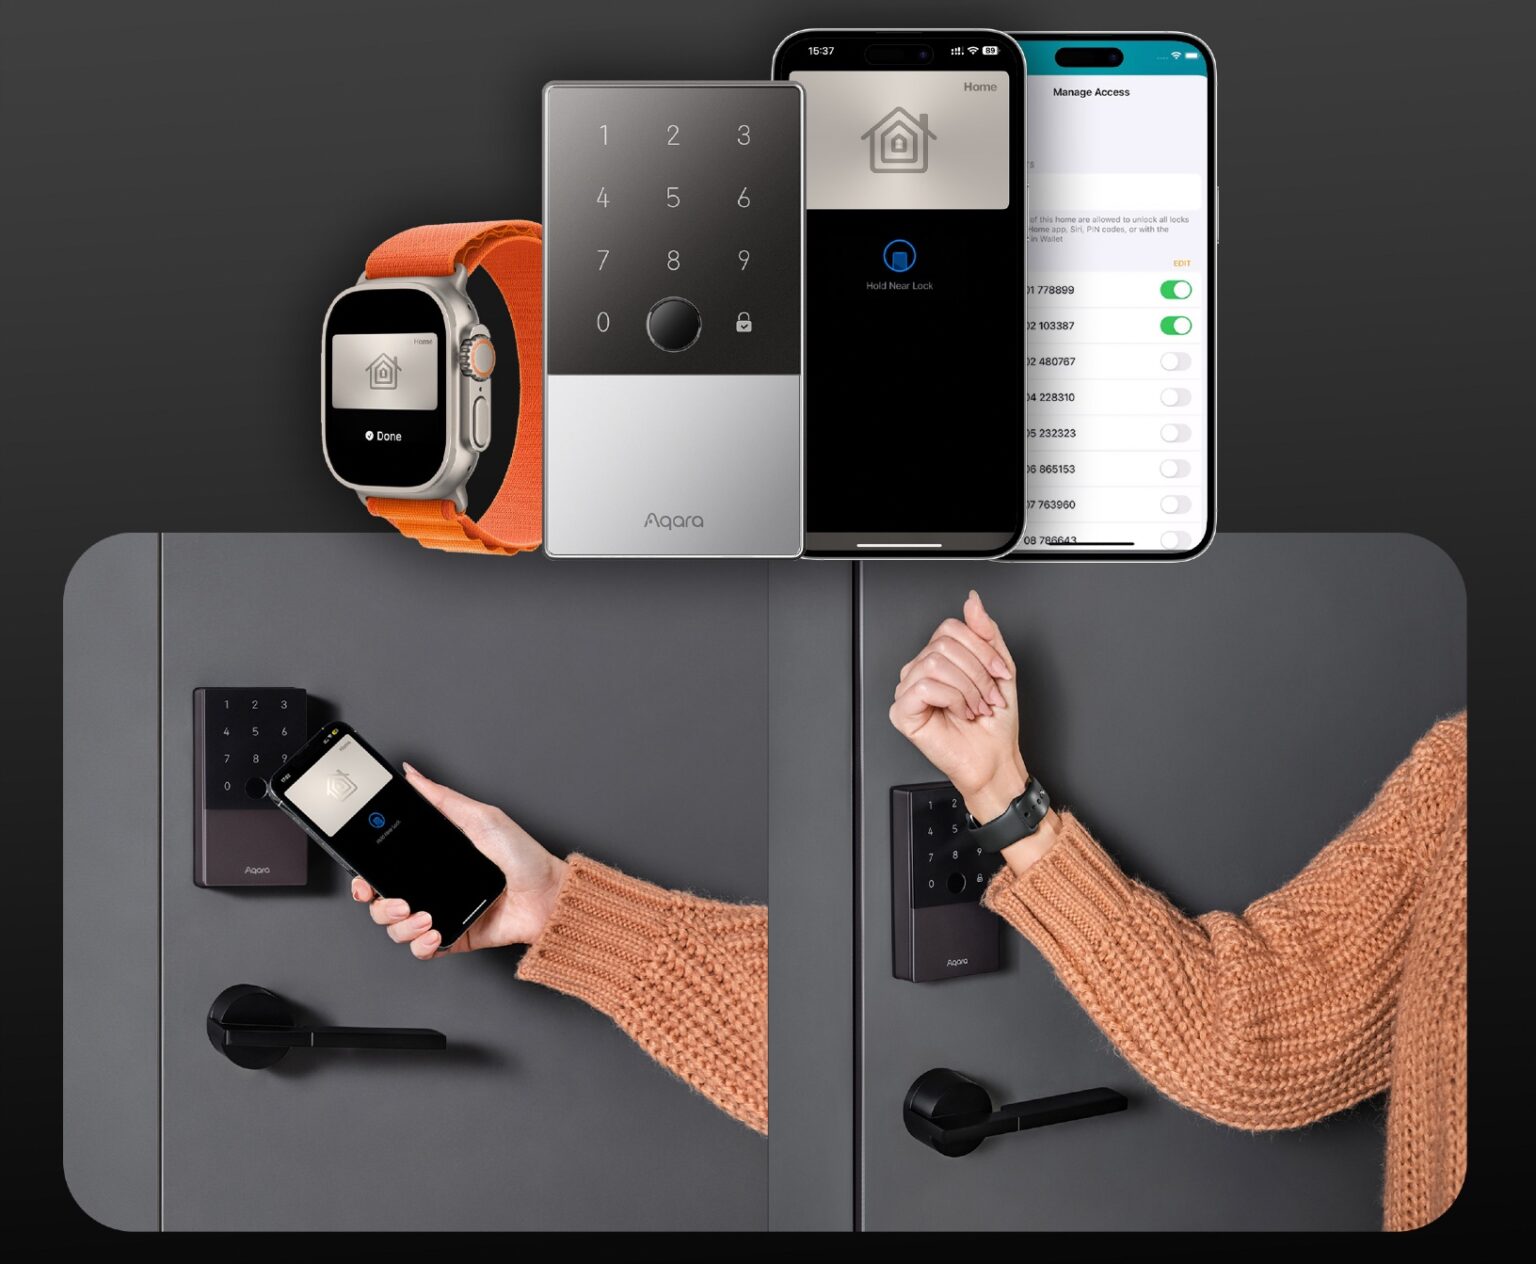 You can open the Aqara Smart Lock U100 with your iPhone or Apple Watch.